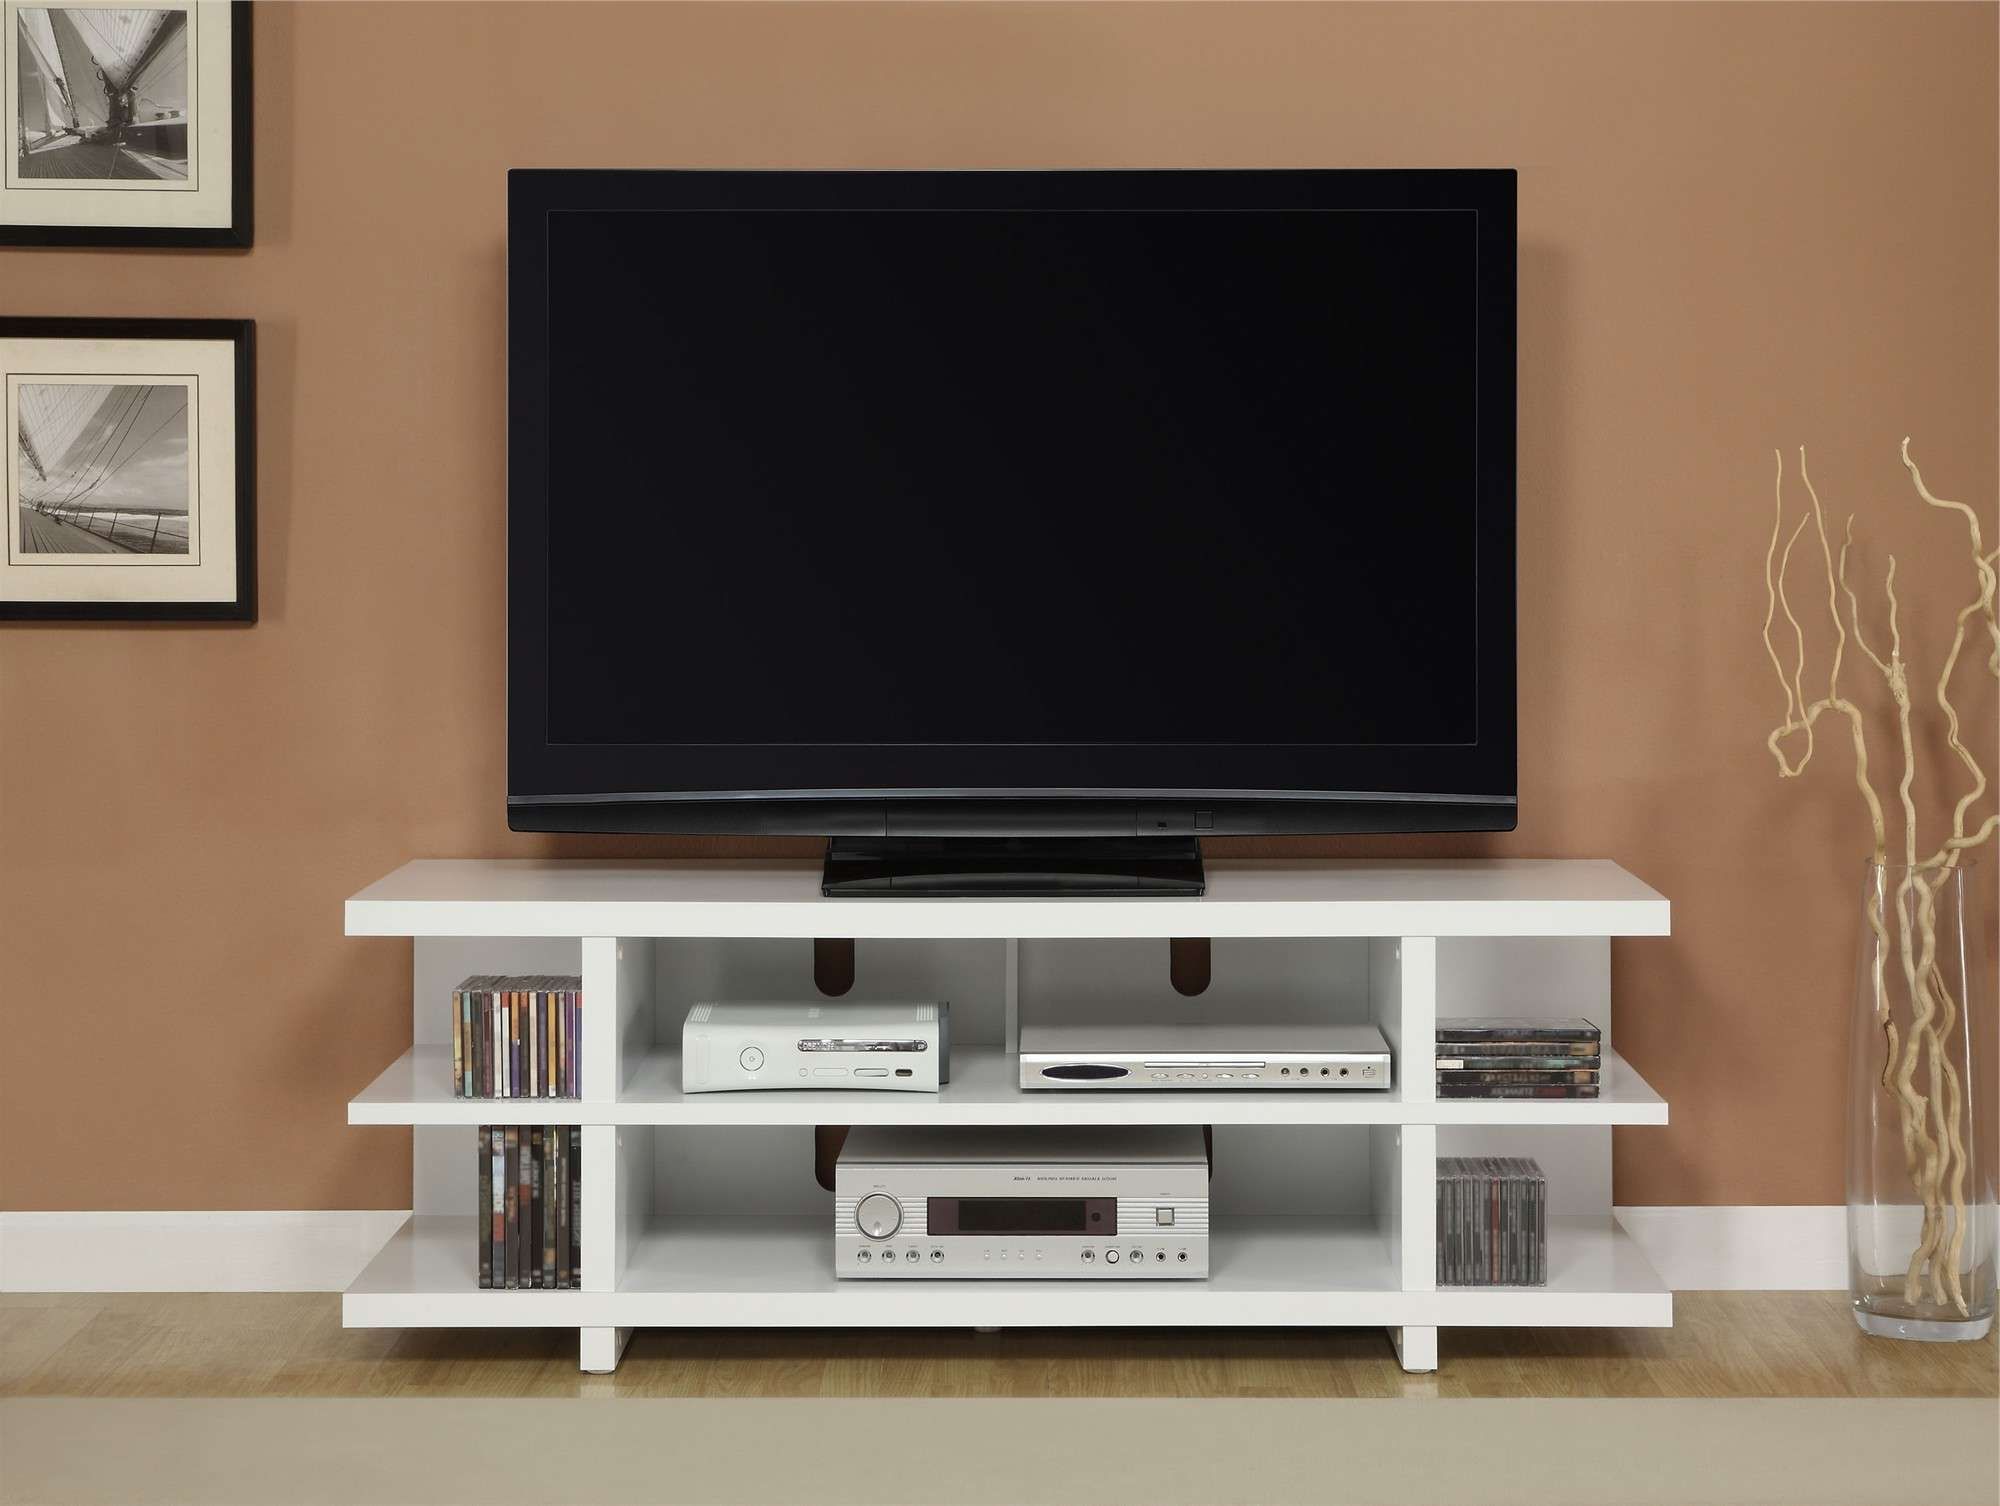 White Stained Wooden Tv Stand Having Several Open Shelves For Throughout Contemporary Tv Stands For Flat Screens (View 1 of 15)